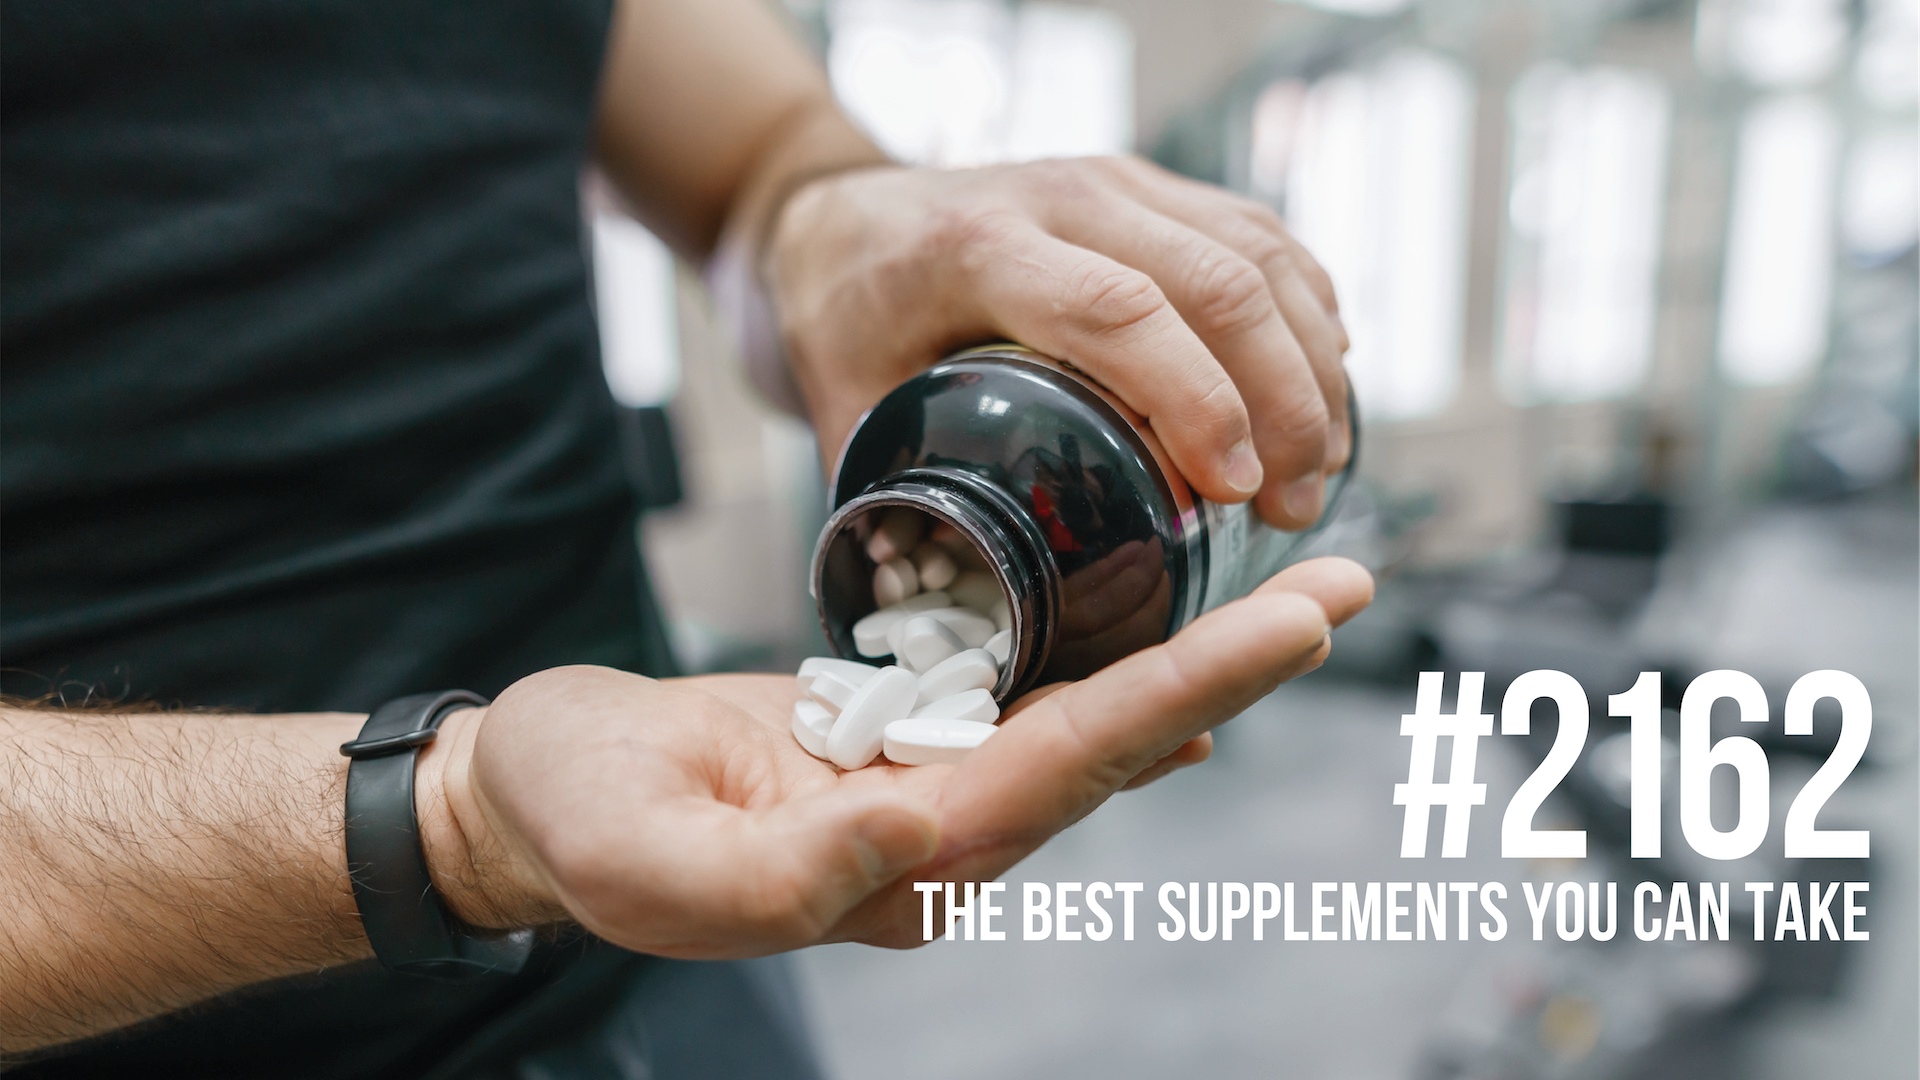 2162: The Best Supplements You Can Take for Building Muscle, Performance & Health